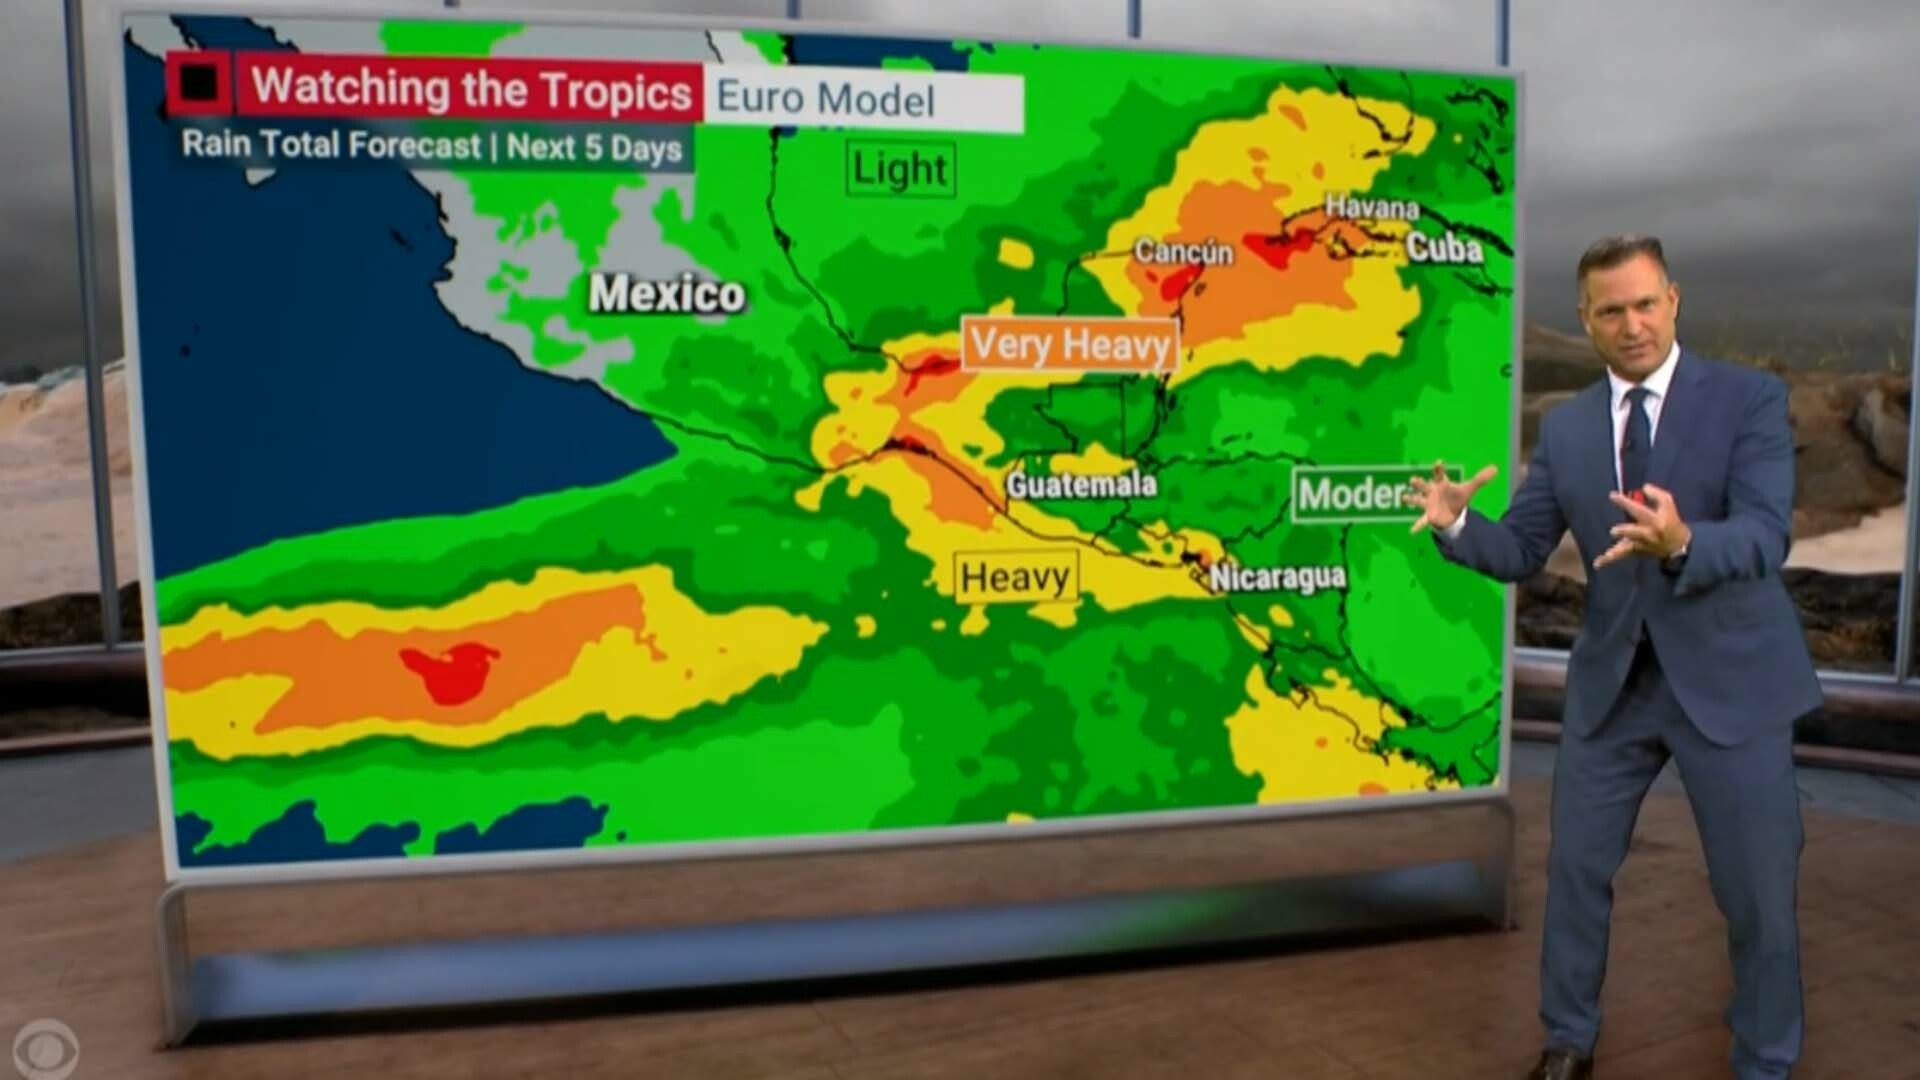 Watch Cbs Evening News Us Braces For Severe Storms Extreme Heat Full Show On Cbs 7938